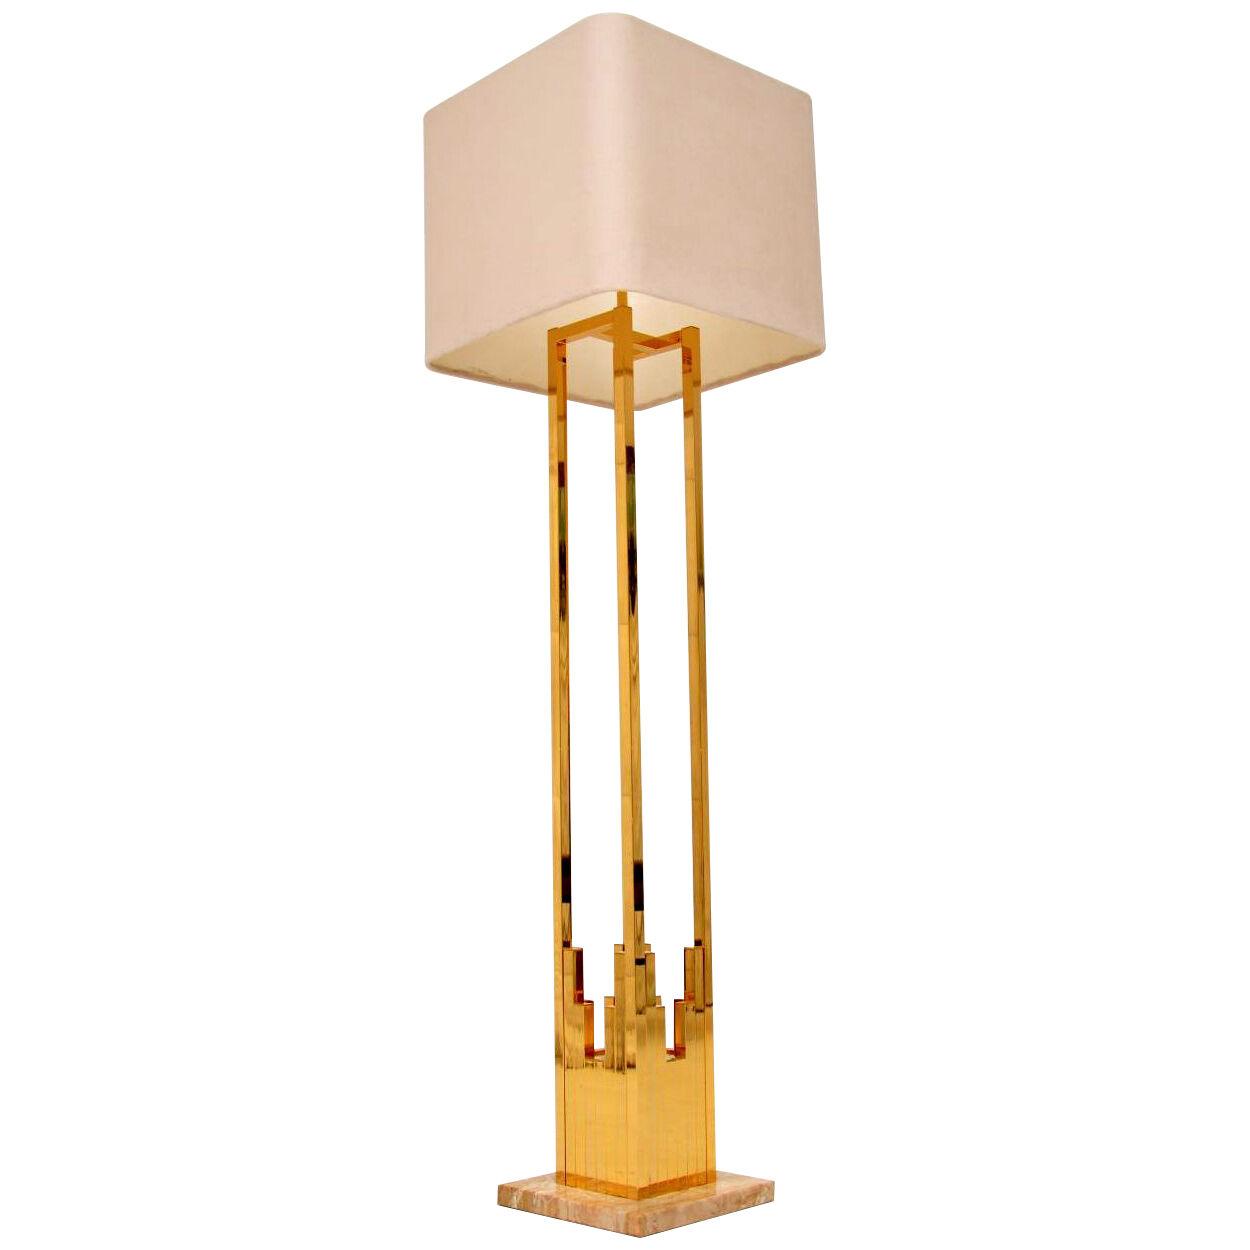 1970's Vintage Italian Brass & Marble Lamp by F. Fabbian